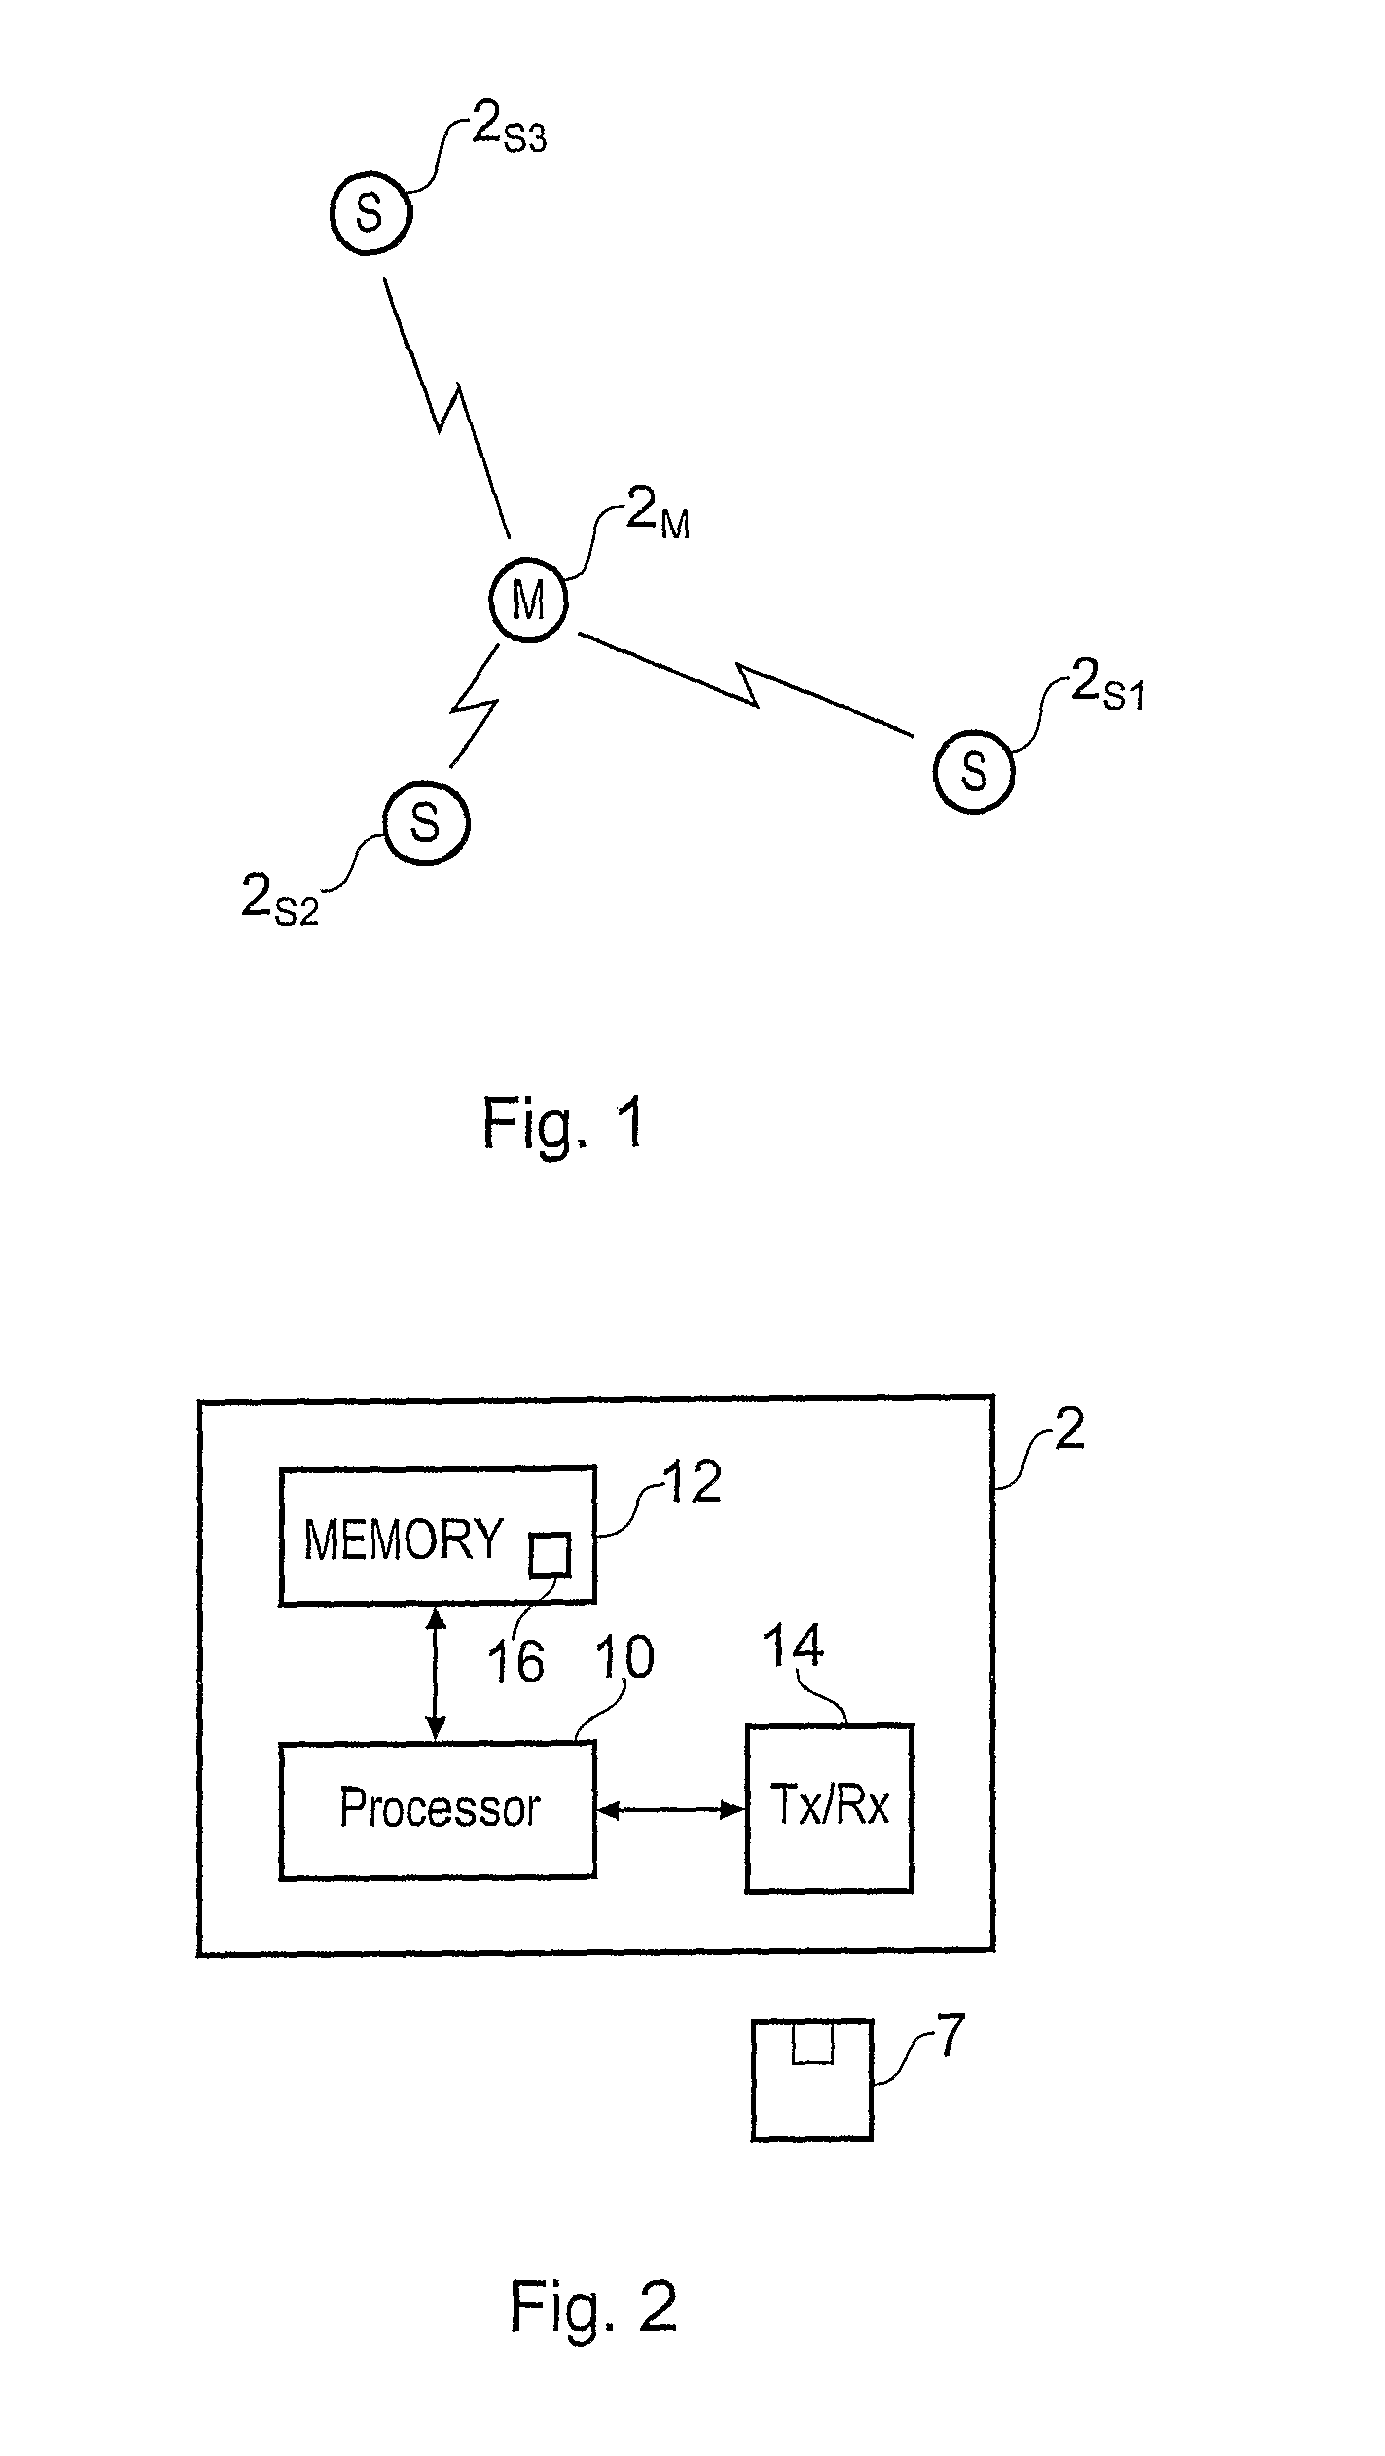 Method, Apparatus or Computer Program for Changing From Scheduled to Unscheduled Communication Modes